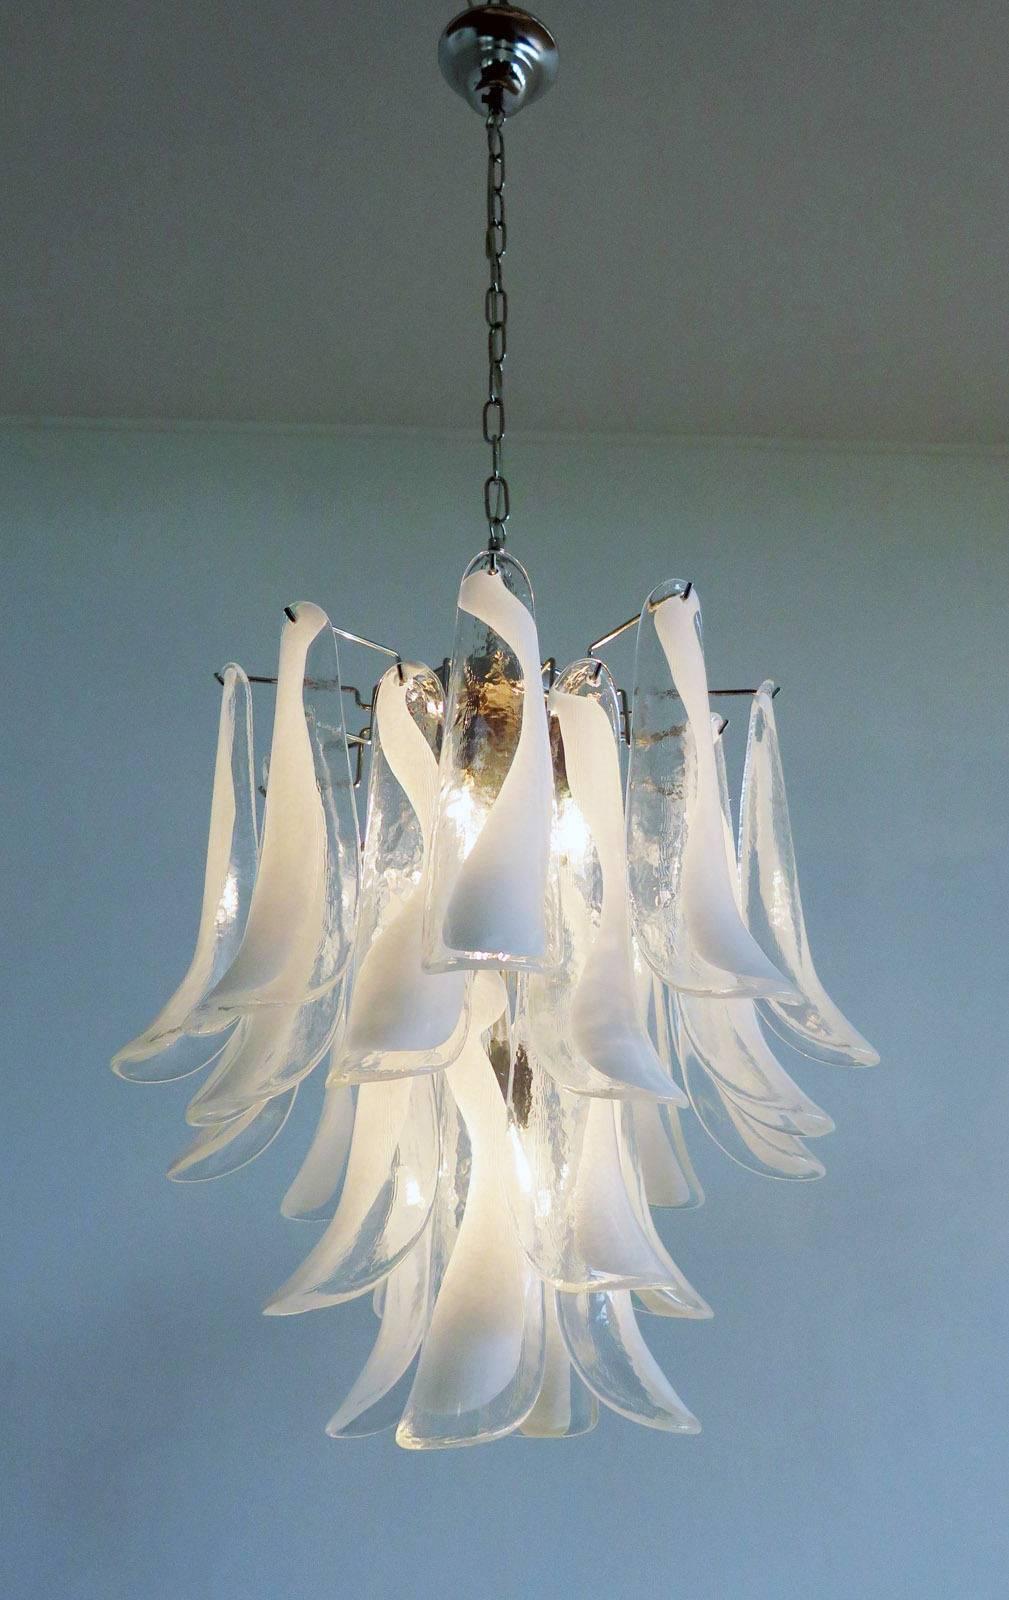 Italian vintage Murano chandelier made by 26 glass petals (transparent and white “lattimo”) in a chrome frame.

Dimensions: 47.25 inches (120 cm) height with chain; 23.62 inches (60 cm) height without chain; 19.70 inches (50 cm)